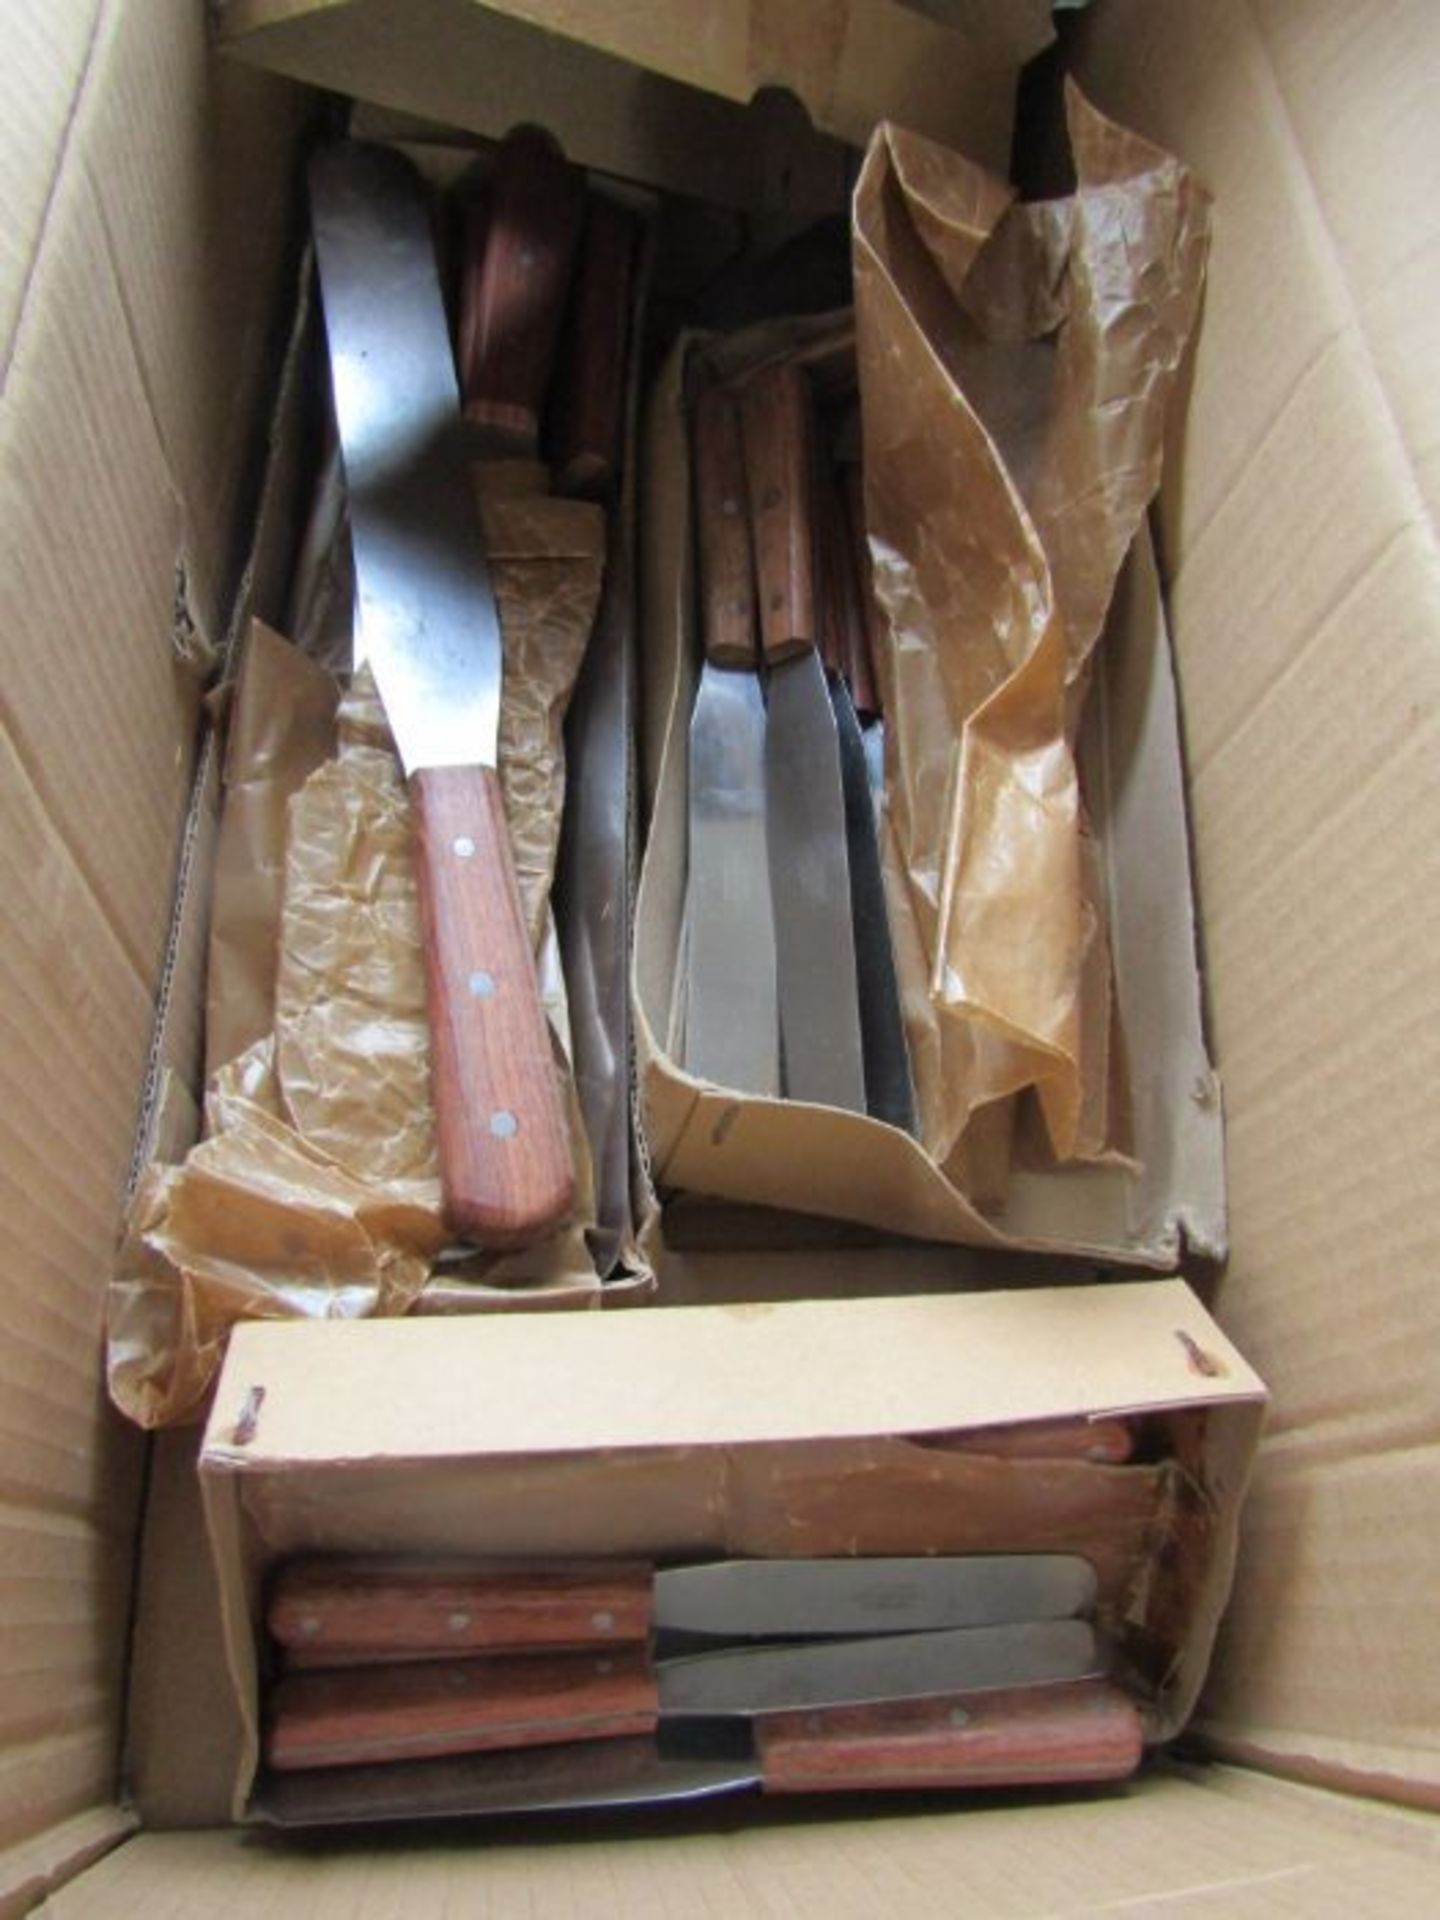 Over 200 Palette Knives - 3 different sizes - re-sell over £1000